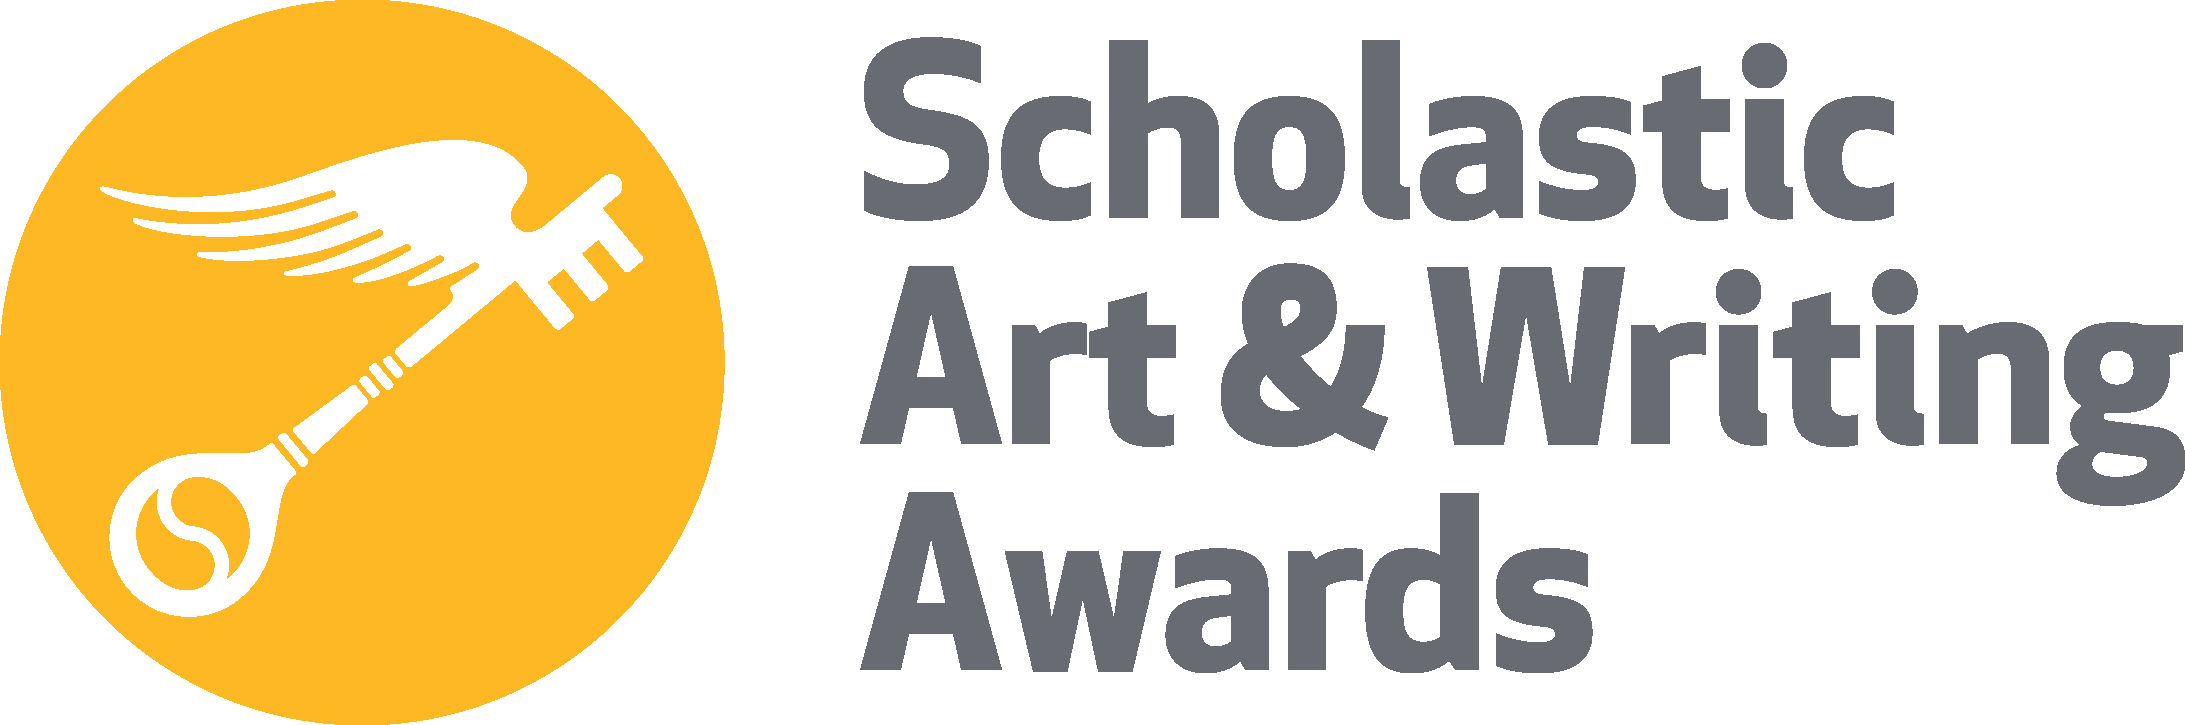 CALL FOR SUBMISSIONS NOW OPEN FOR SCHOLASTIC ART & WRITING AWARDS